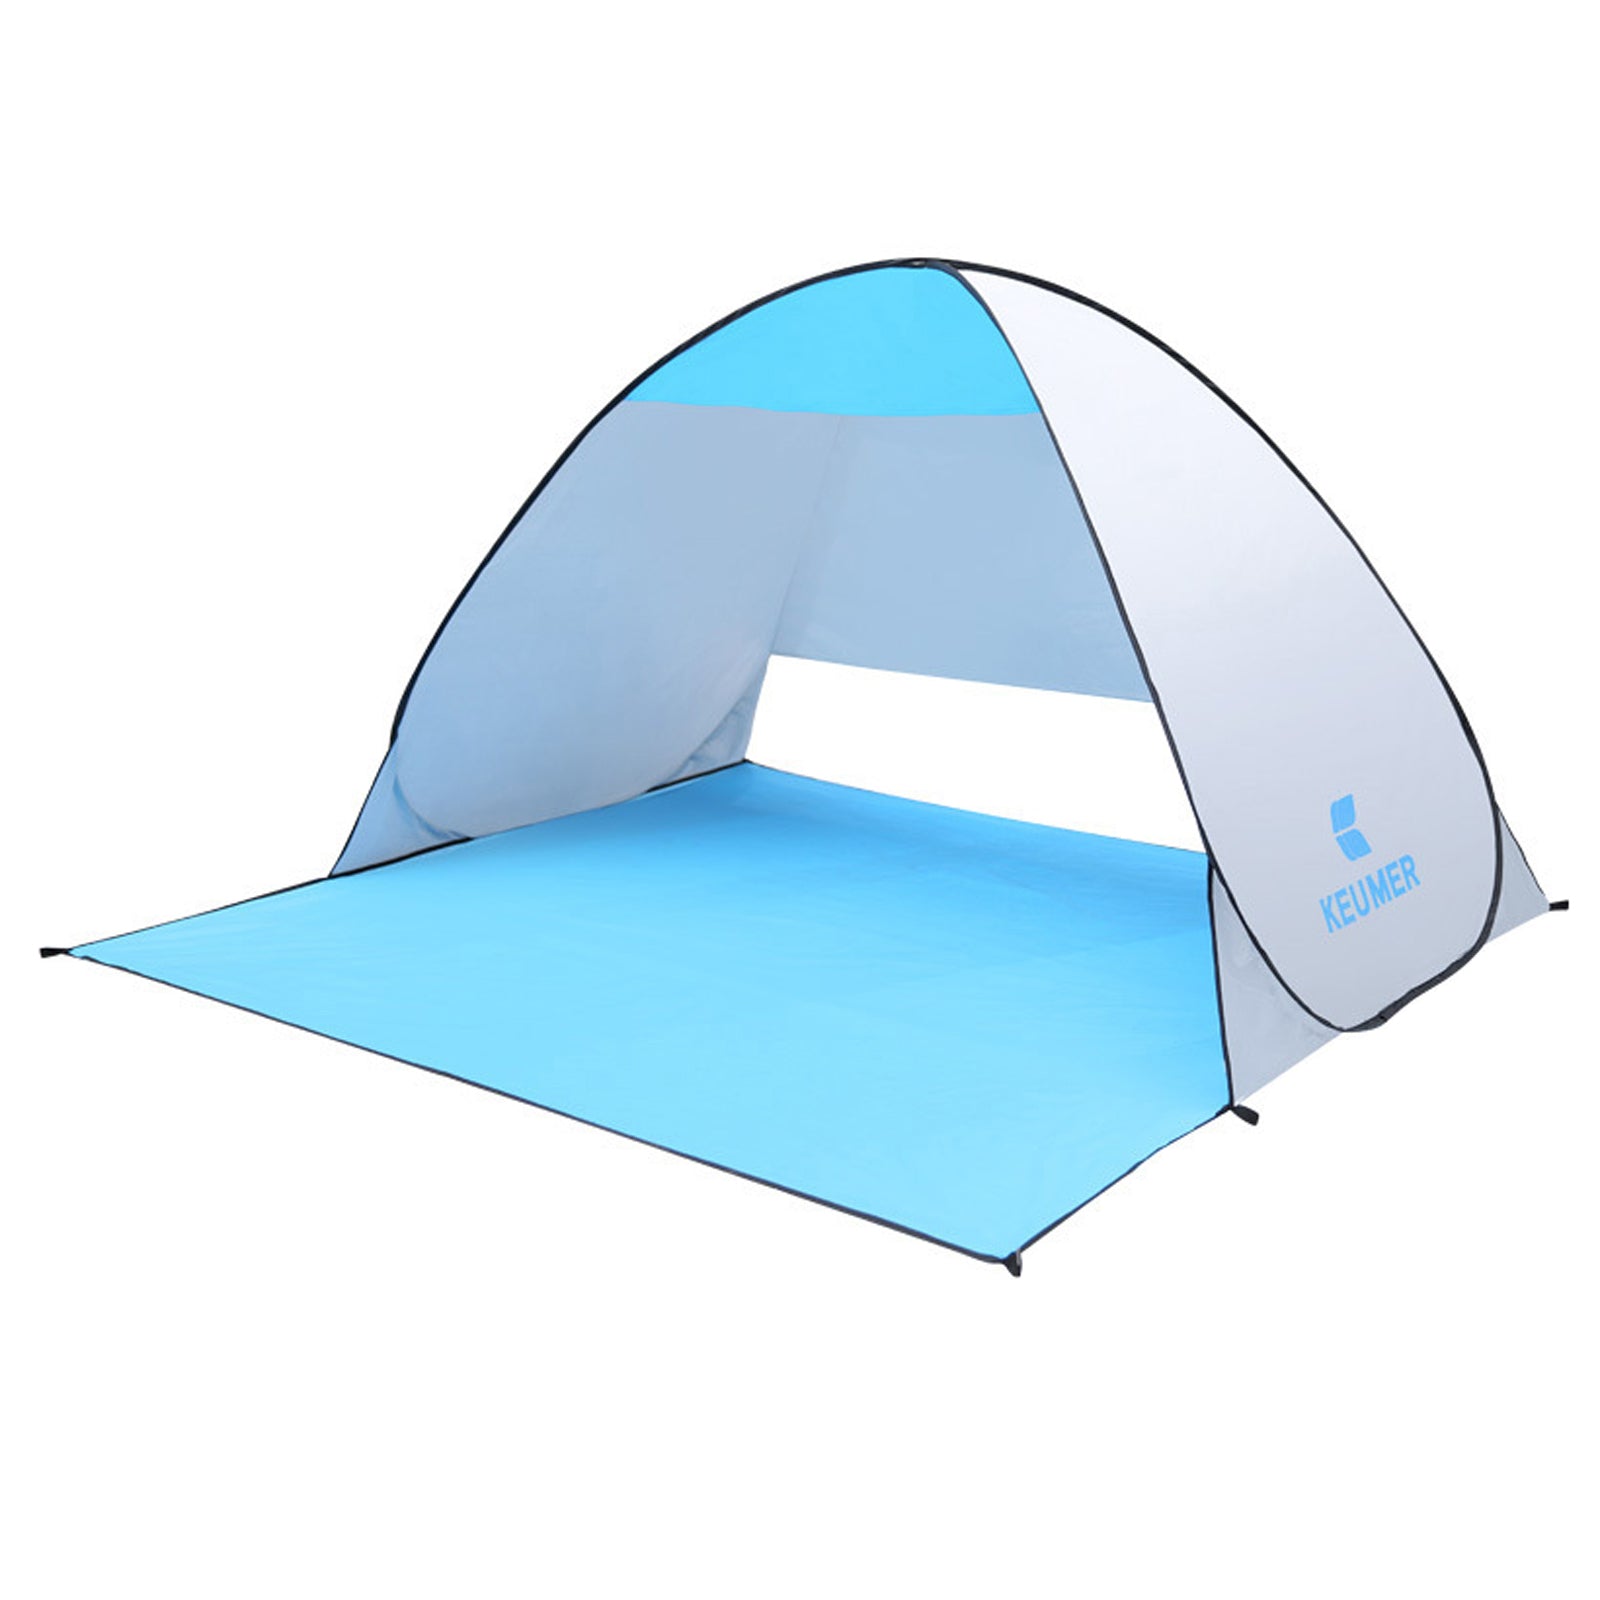 KEUMER 70.9x59x43.3 Inch Automatic Instant Pop-up Beach Tent Sun Shelter Cabana for Camping Fishing Hiking Picnic